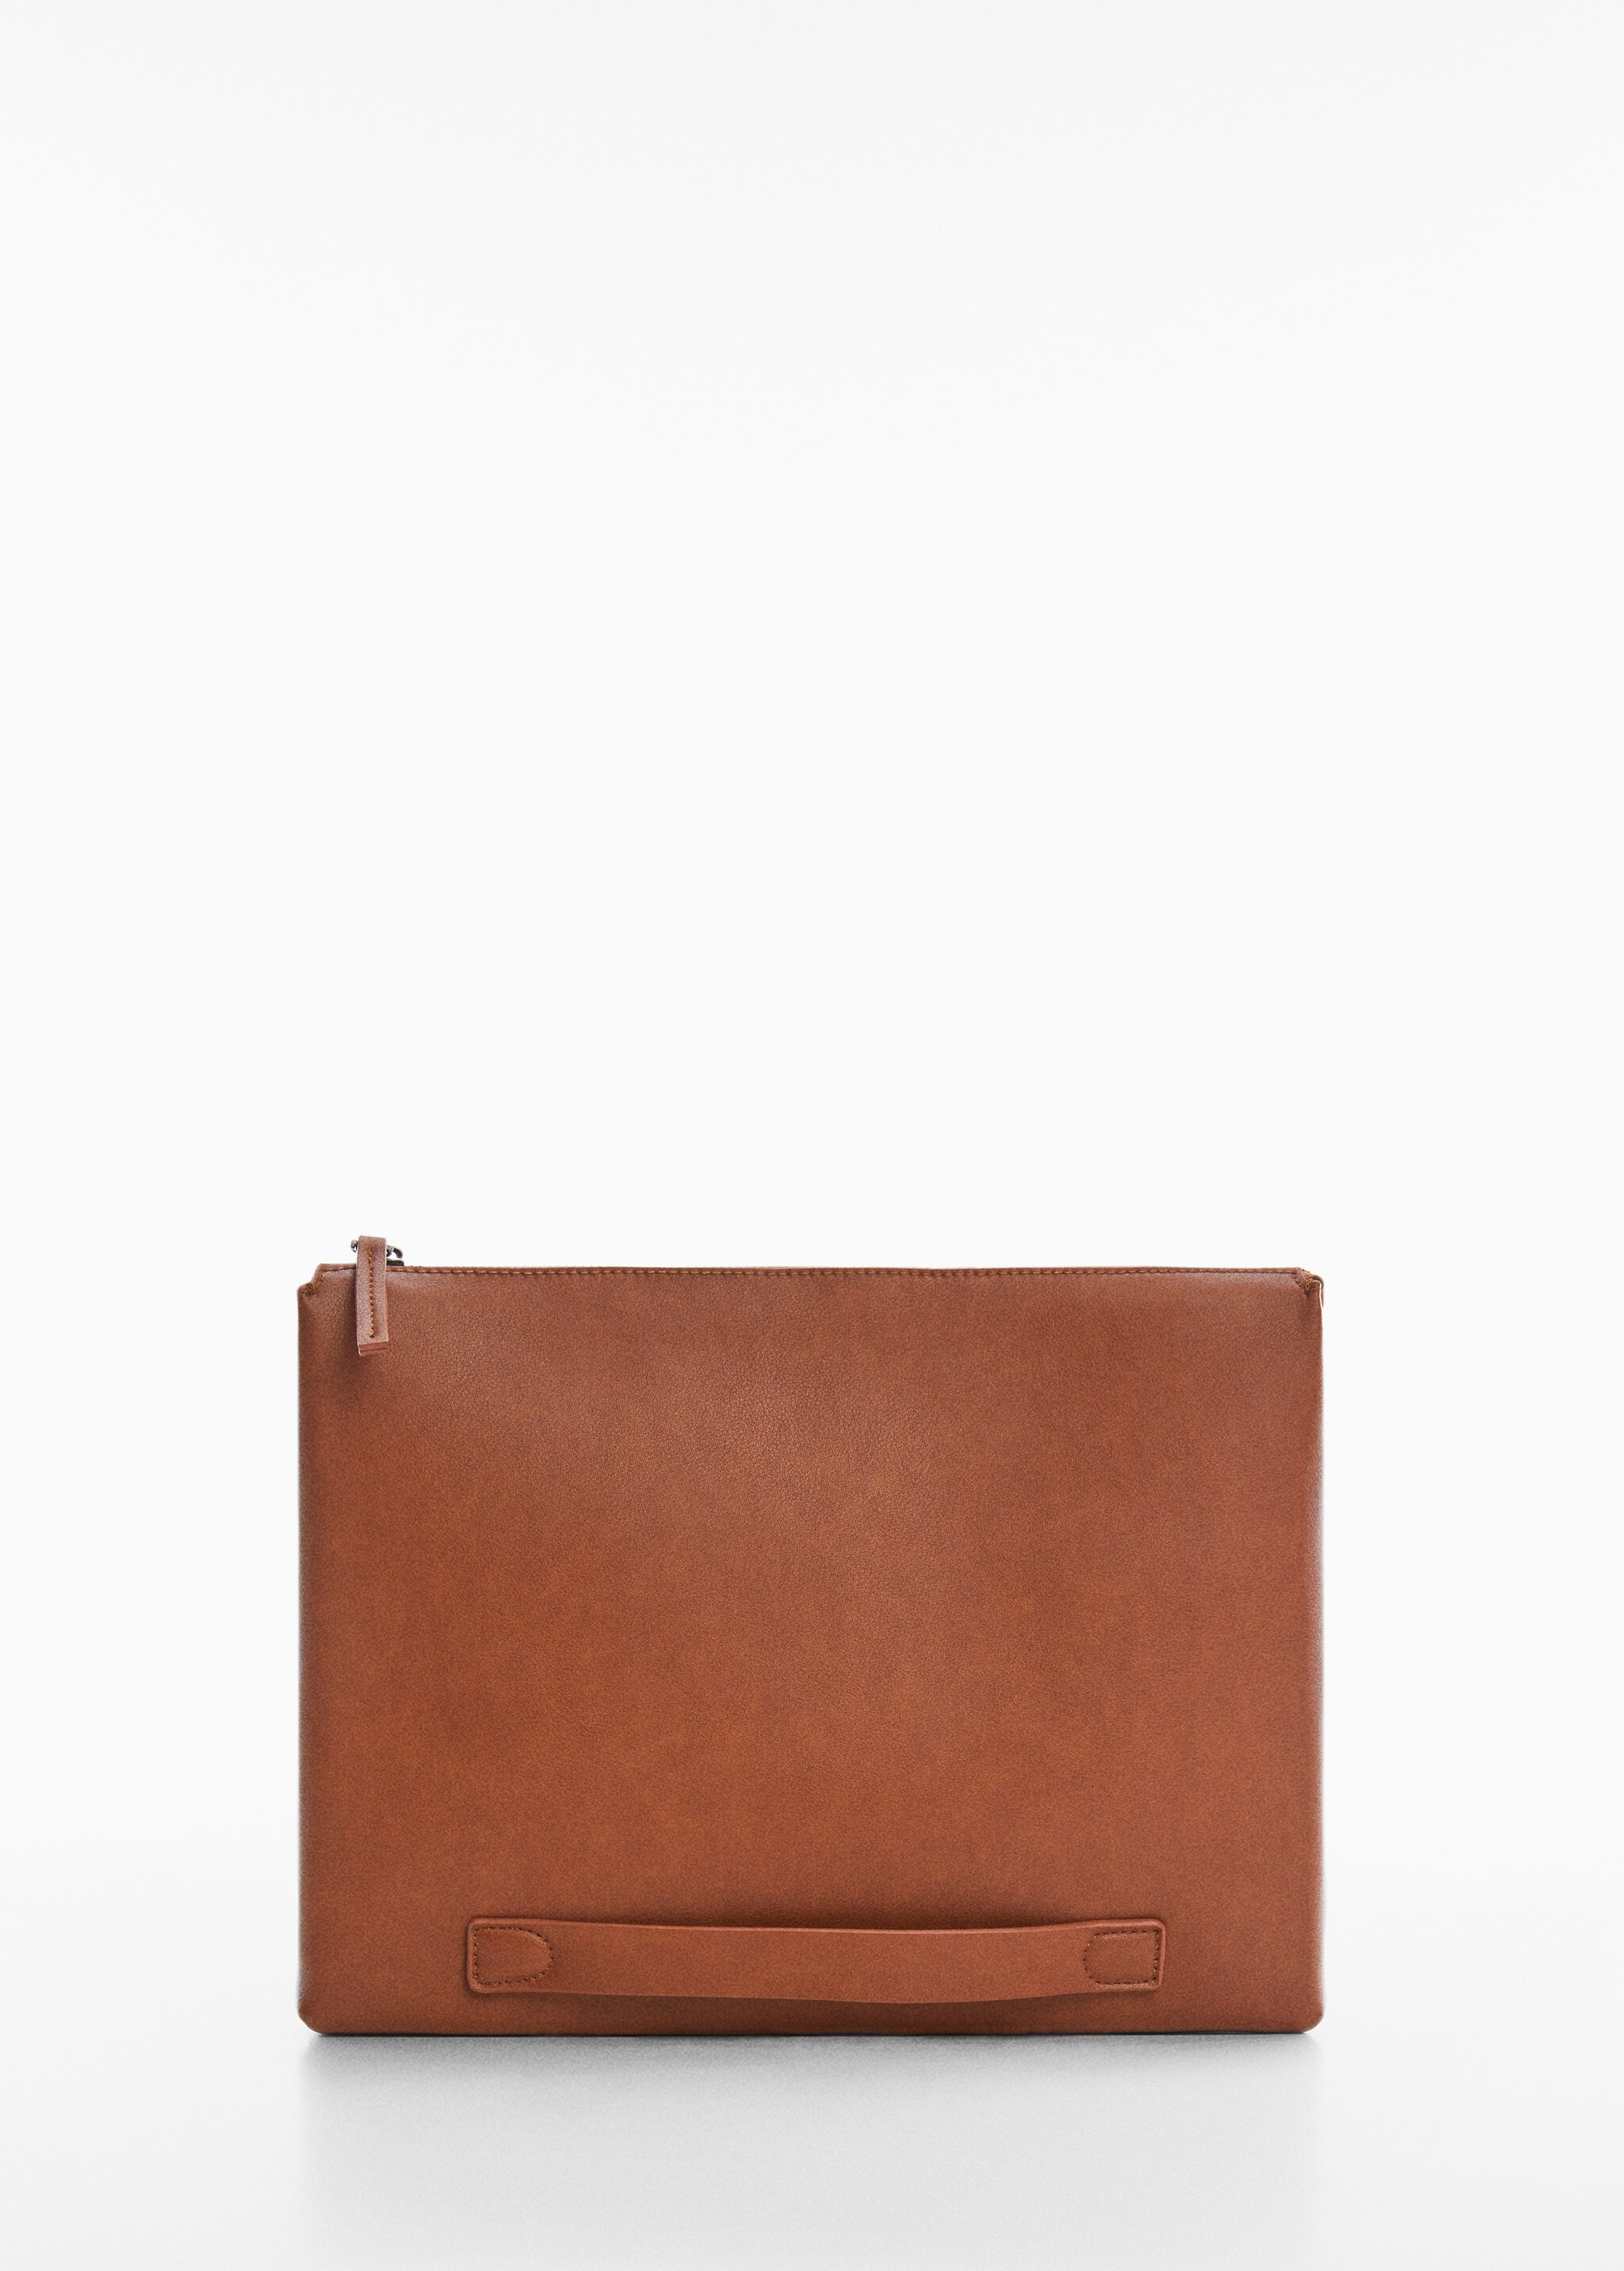 Leather laptop case - Article without model